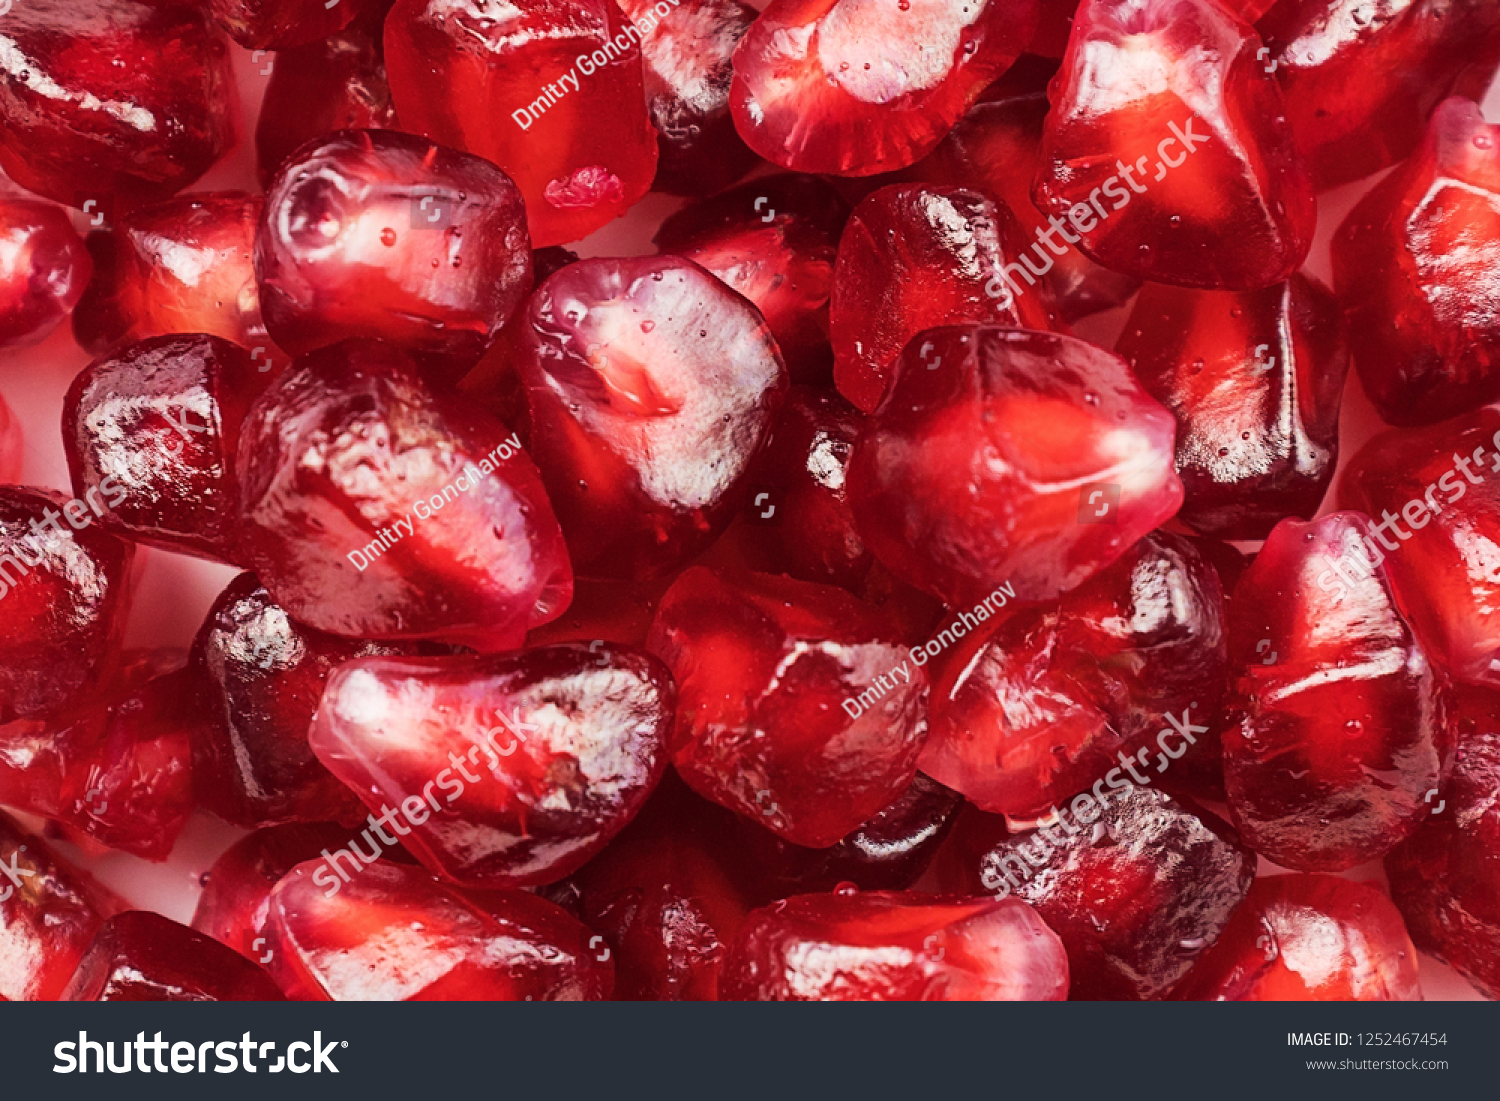 Red juicy pomegranate seeds form the background texture. Close-up #1252467454